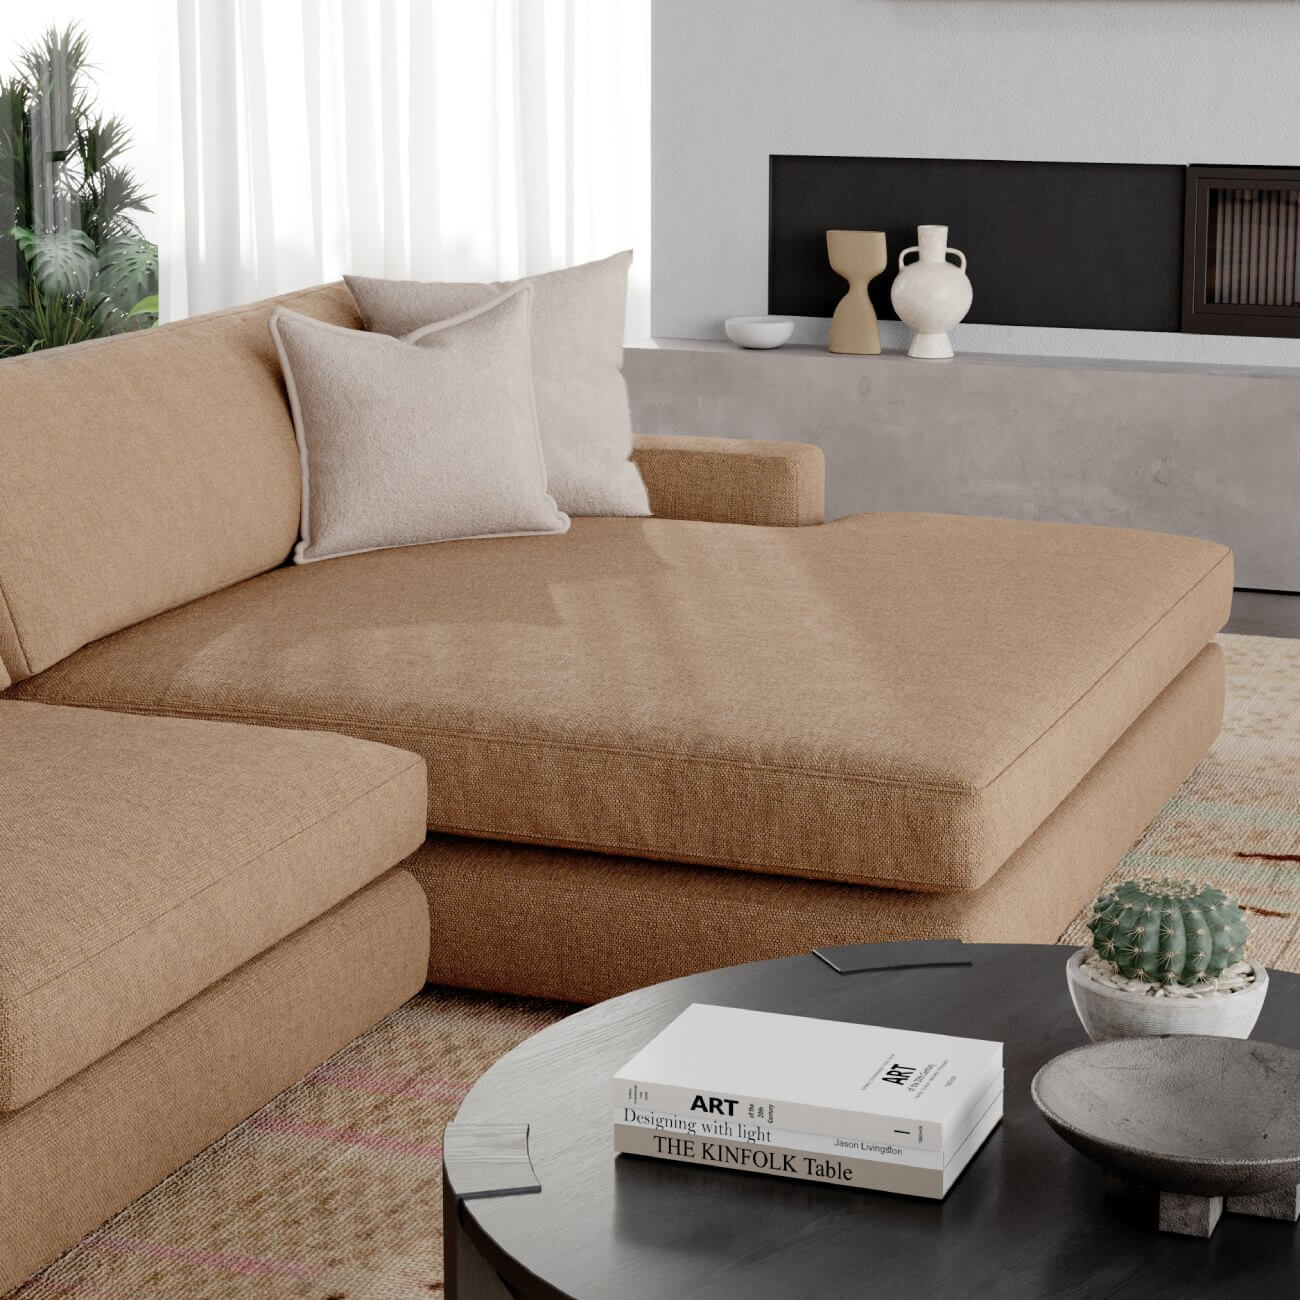 Biscuit coloured sofa with chaise and cream cushions in an attractive living room